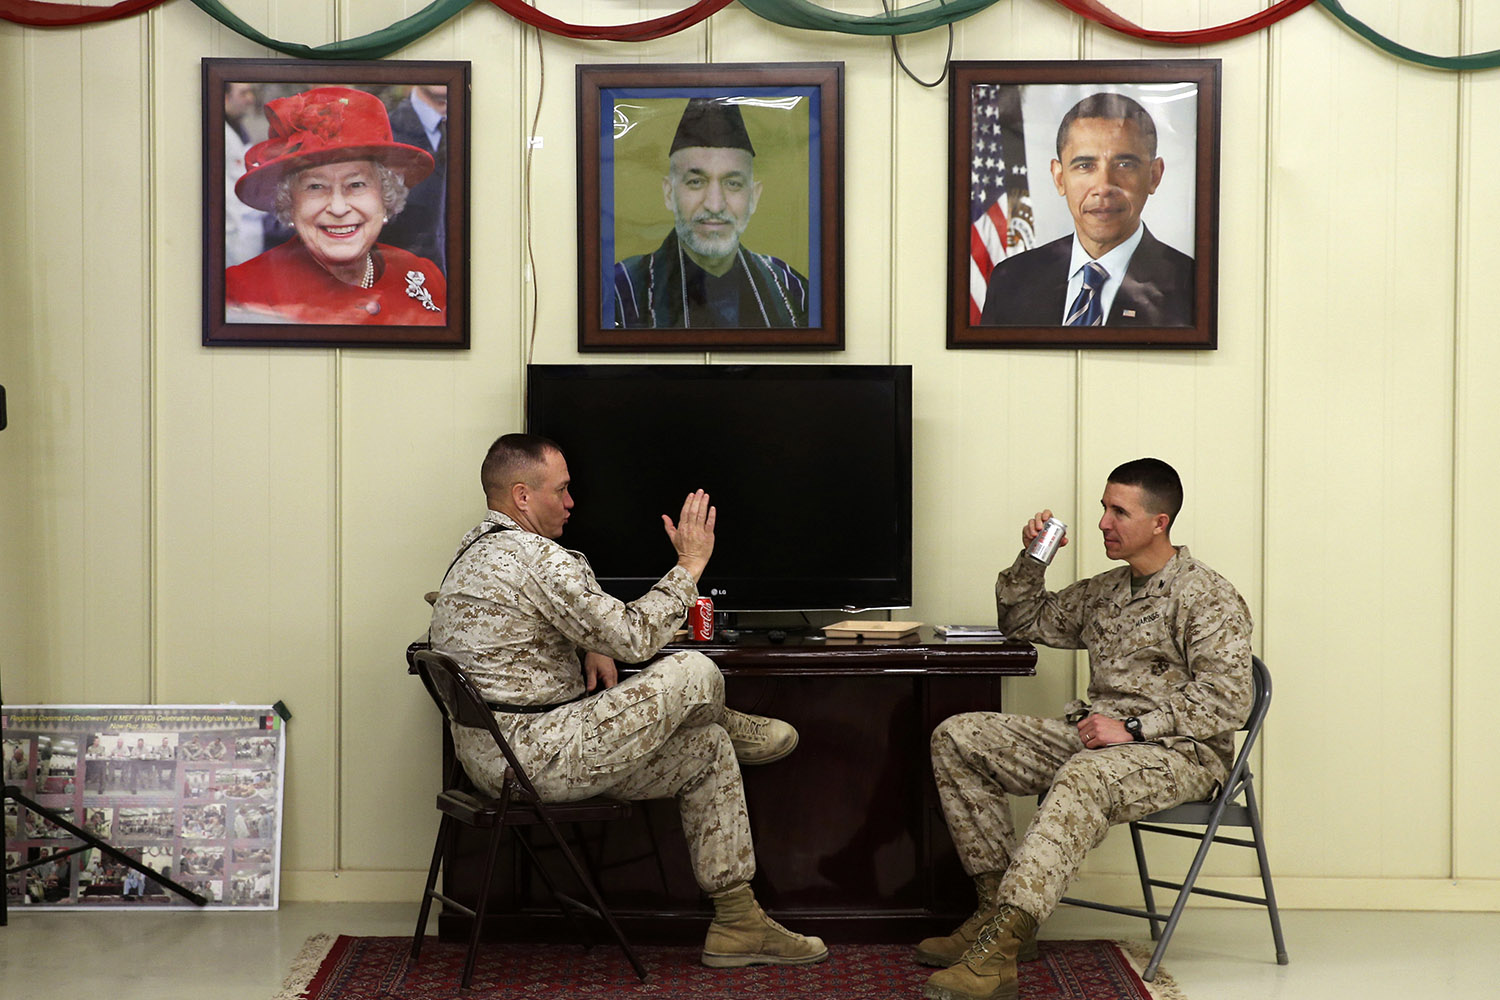 U.S. Marines Lt. Col. Clint Benfield and Col. Ben Watson talk under pictures of Queen Elizabeth, Afghan President Karzai and U.S. President Obama at Camp Bastion